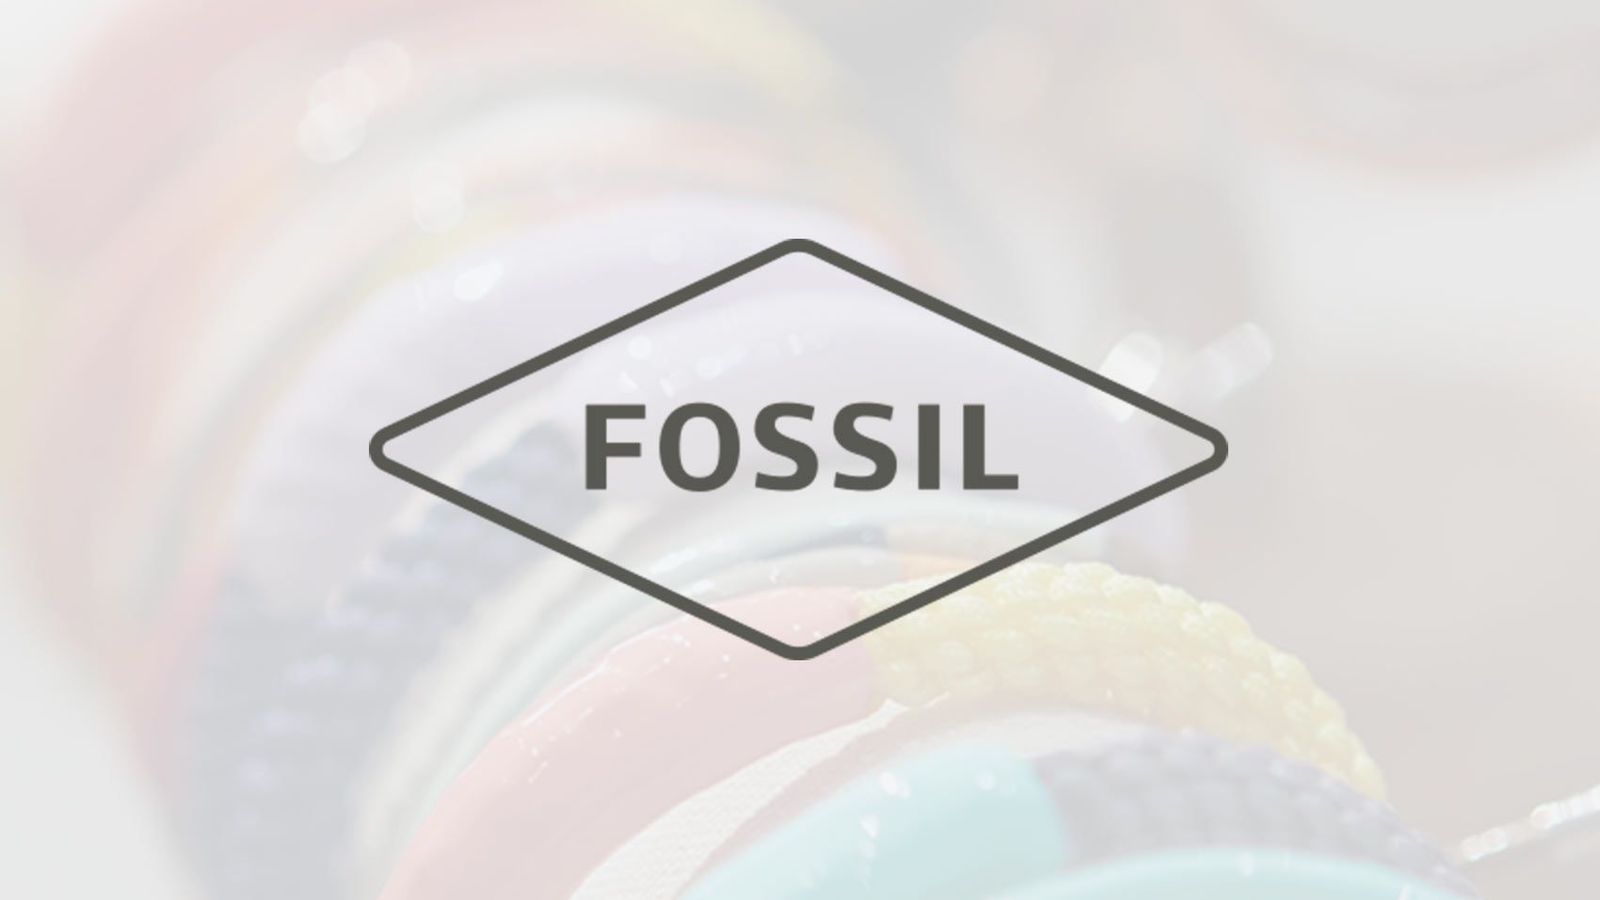 Content Anytime drives usage and allows Fossil to have a one-stop-shop for all learning needs